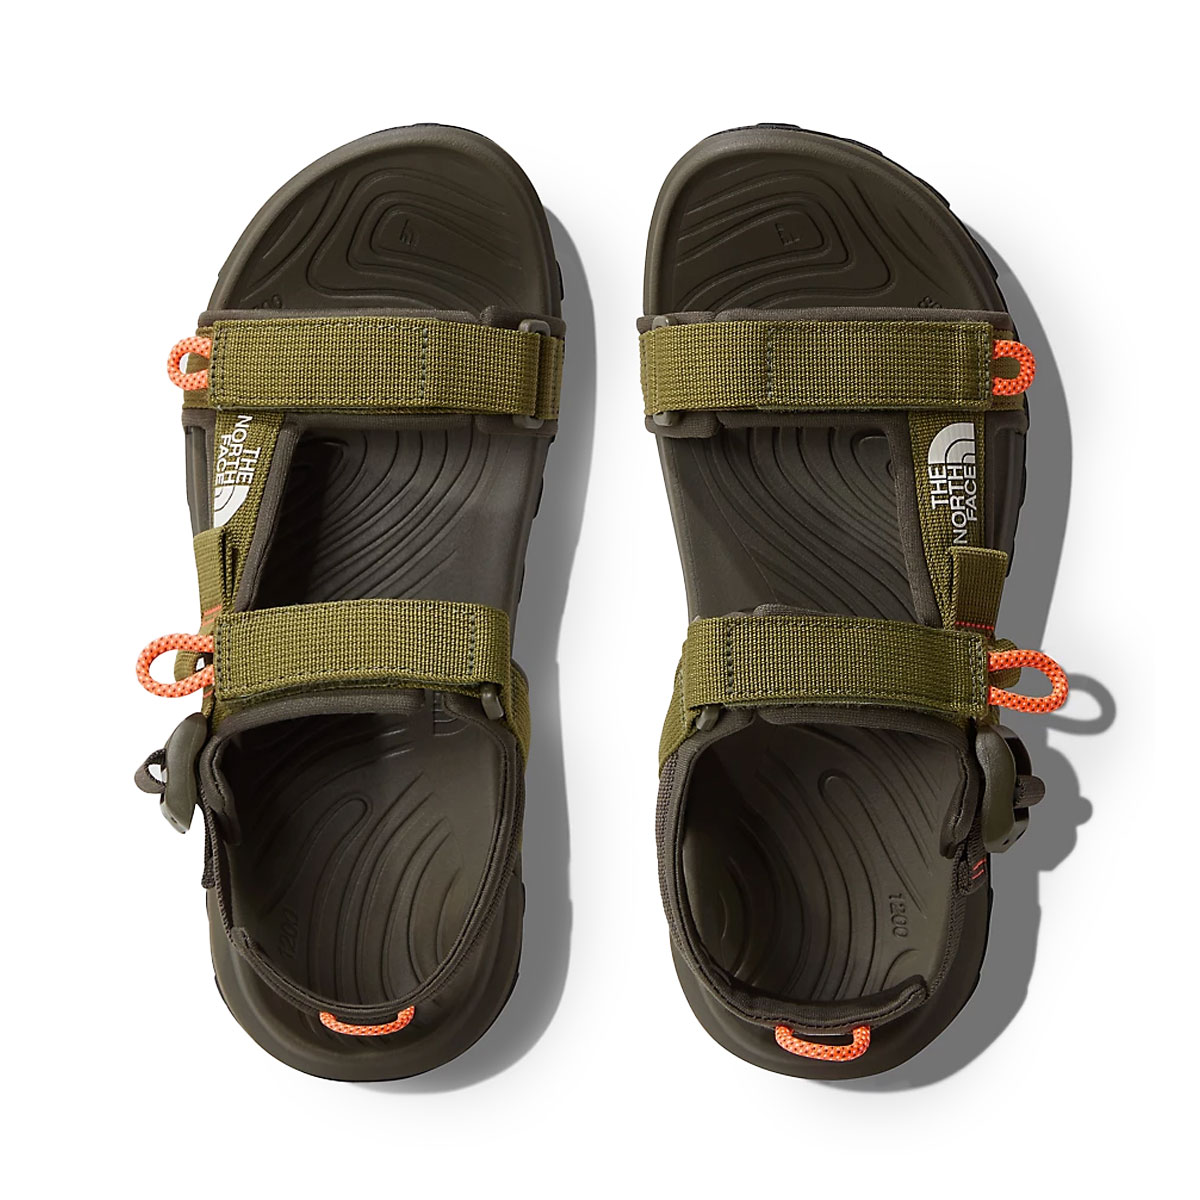 THE NORTH FACE - EXPLORE CAMP SANDALS